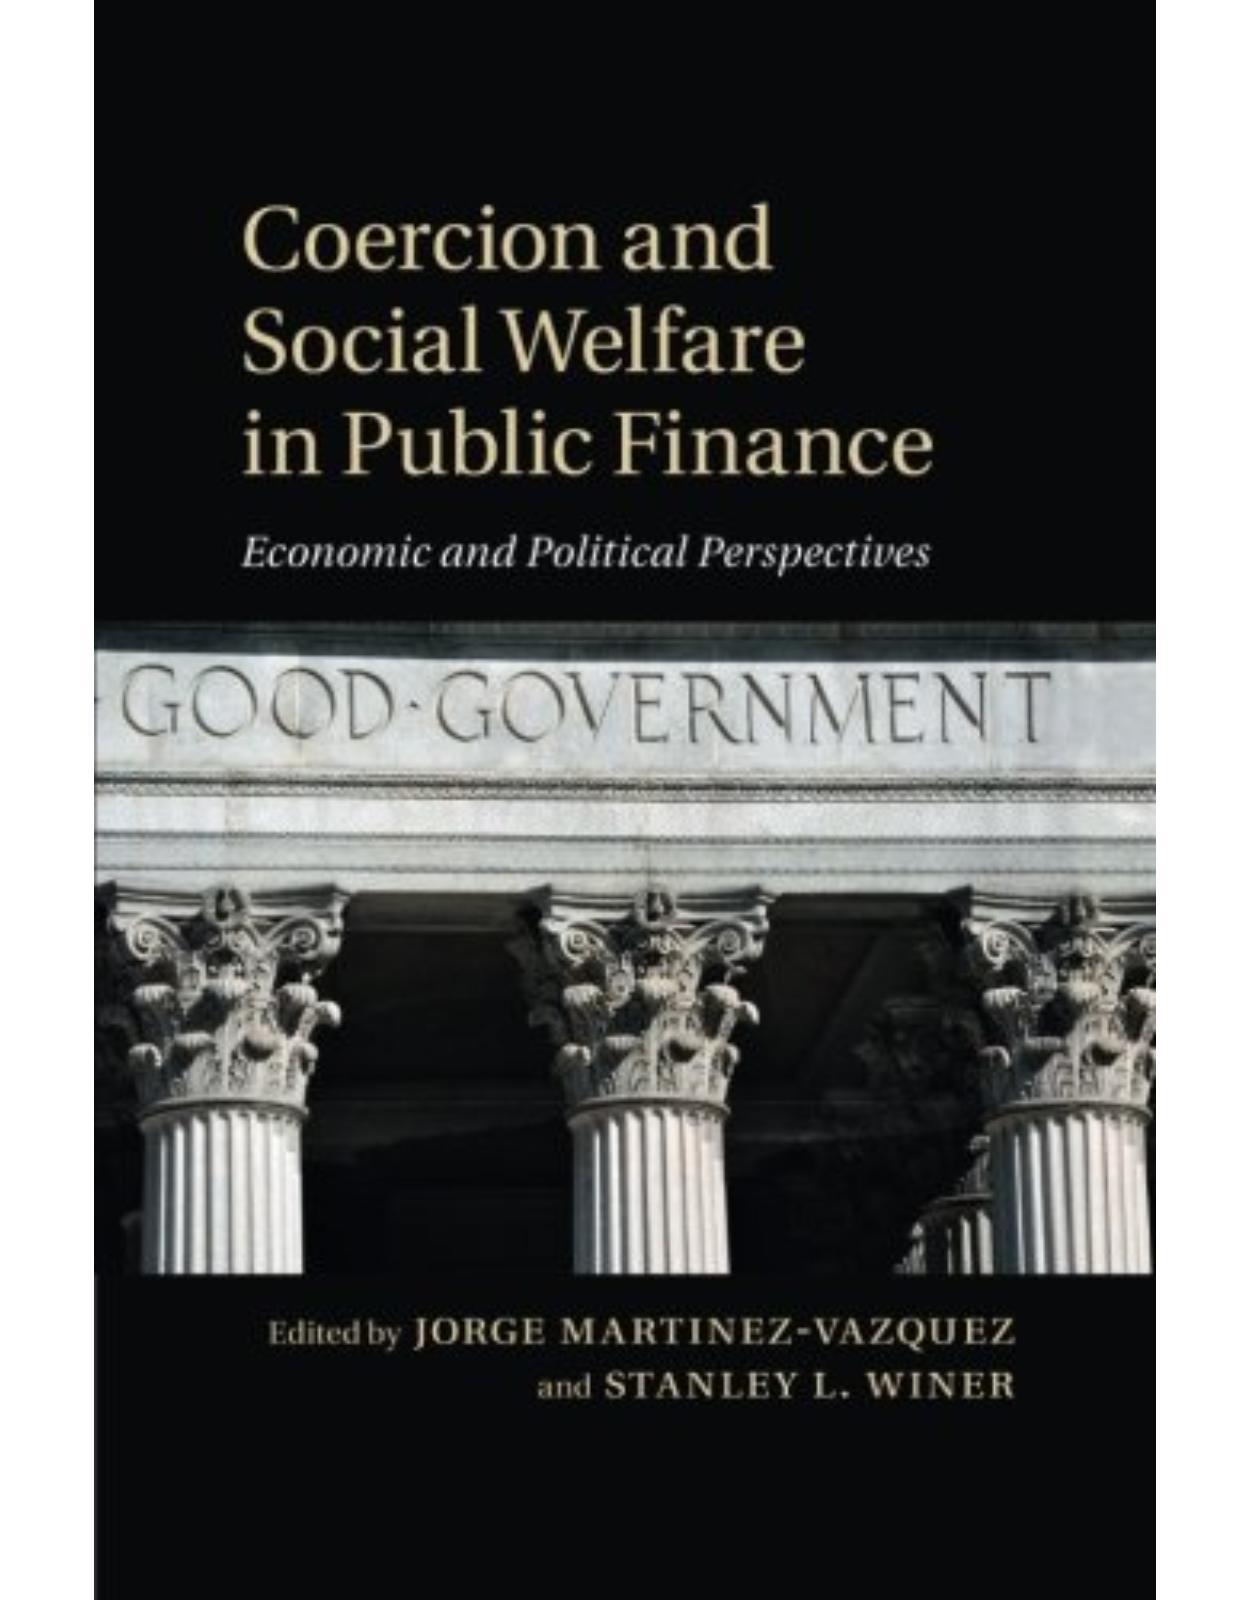 Coercion and Social Welfare in Public Finance: Economic and Political Perspectives